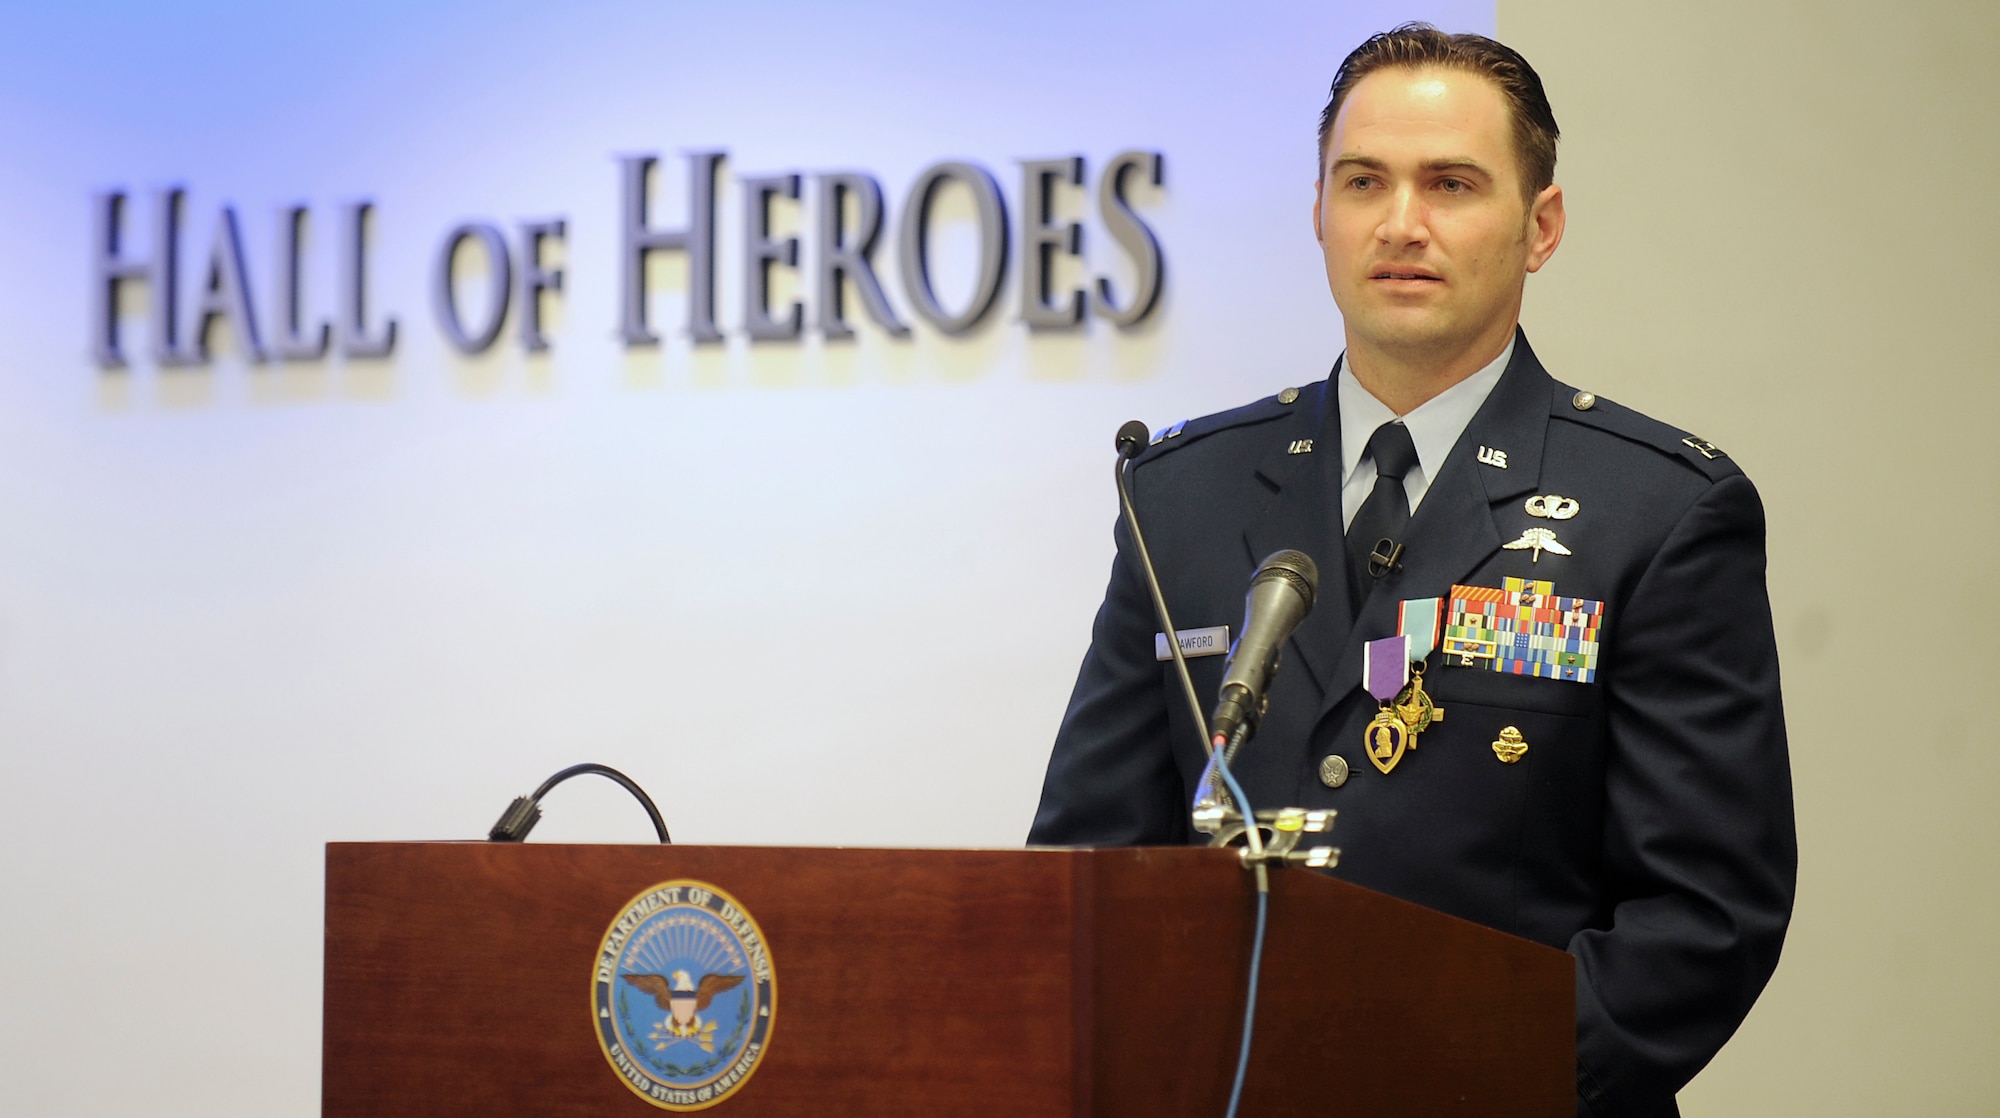 Capt. Barry Crawford speaks after Air Force Chief of Staff Gen. Norton Schwartz presented him with the Air Force Cross and Purple Heart during a ceremony in the Pentagon's Hall of Heroes in Washington, D.C., on April 12, 2012.  (U.S. Air Force photo/Andy Morataya)